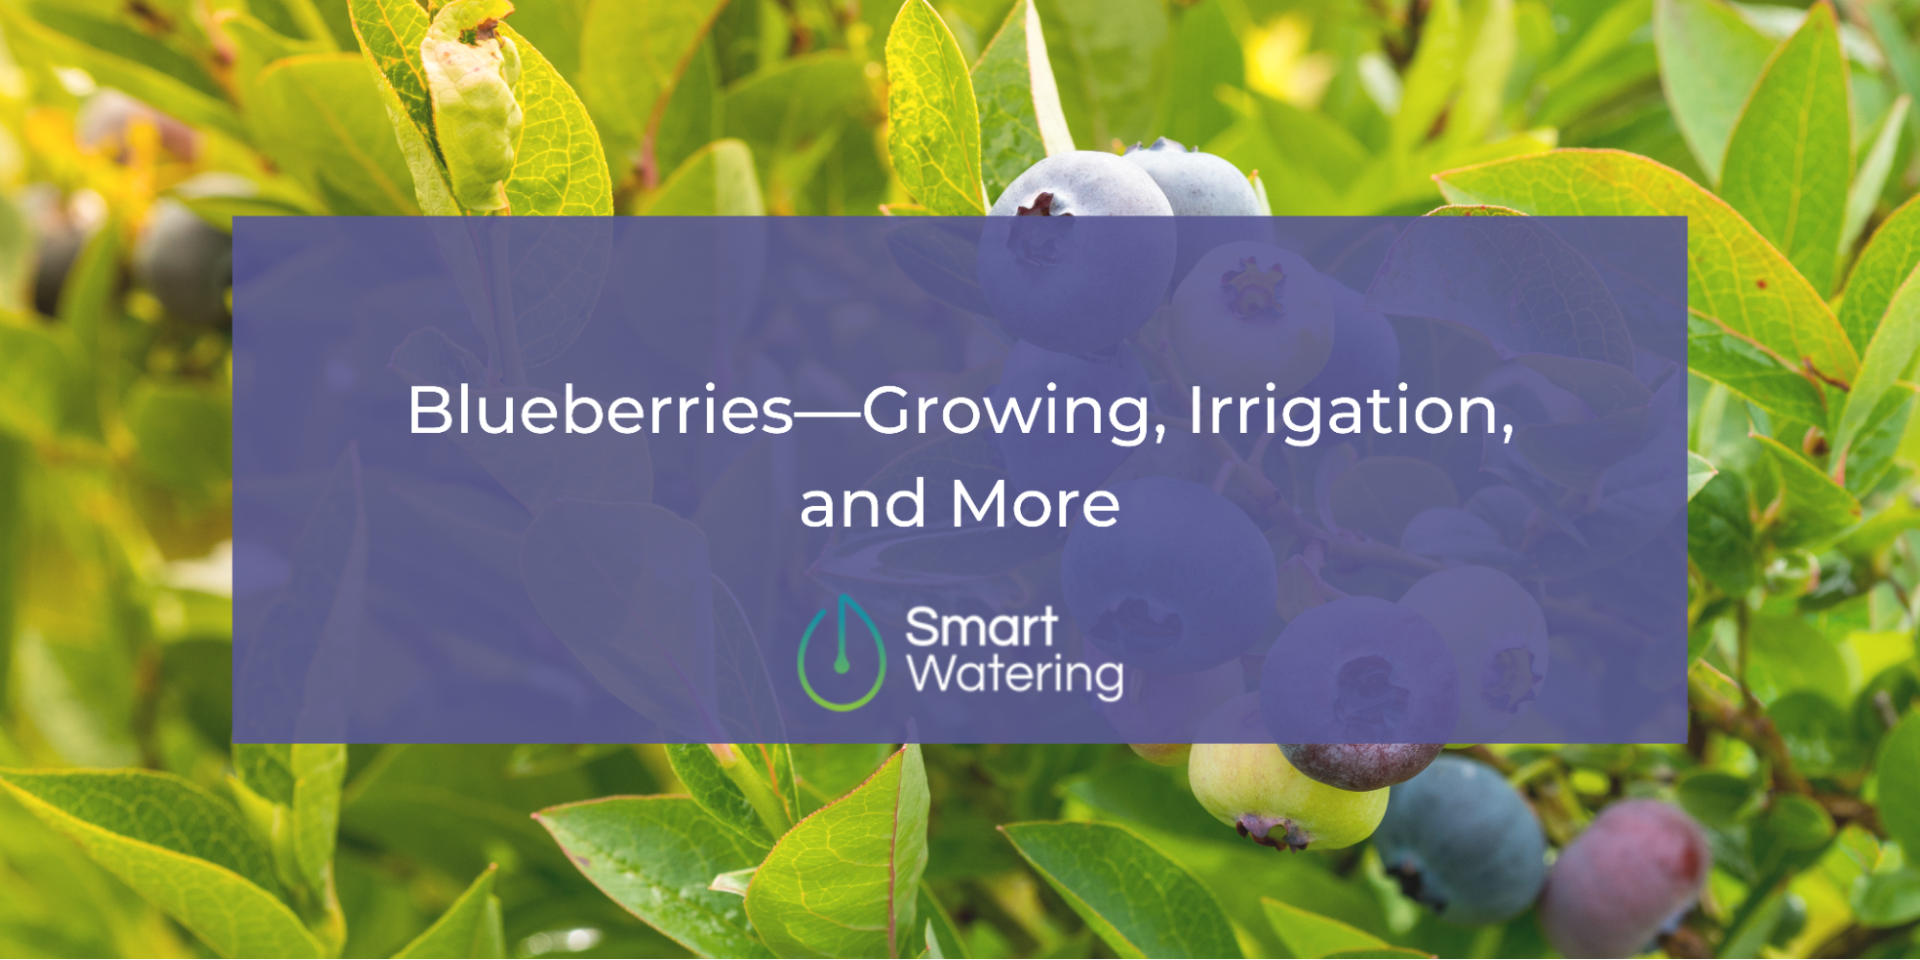 blueberry growing and irrigation, a step by step guide for future growers